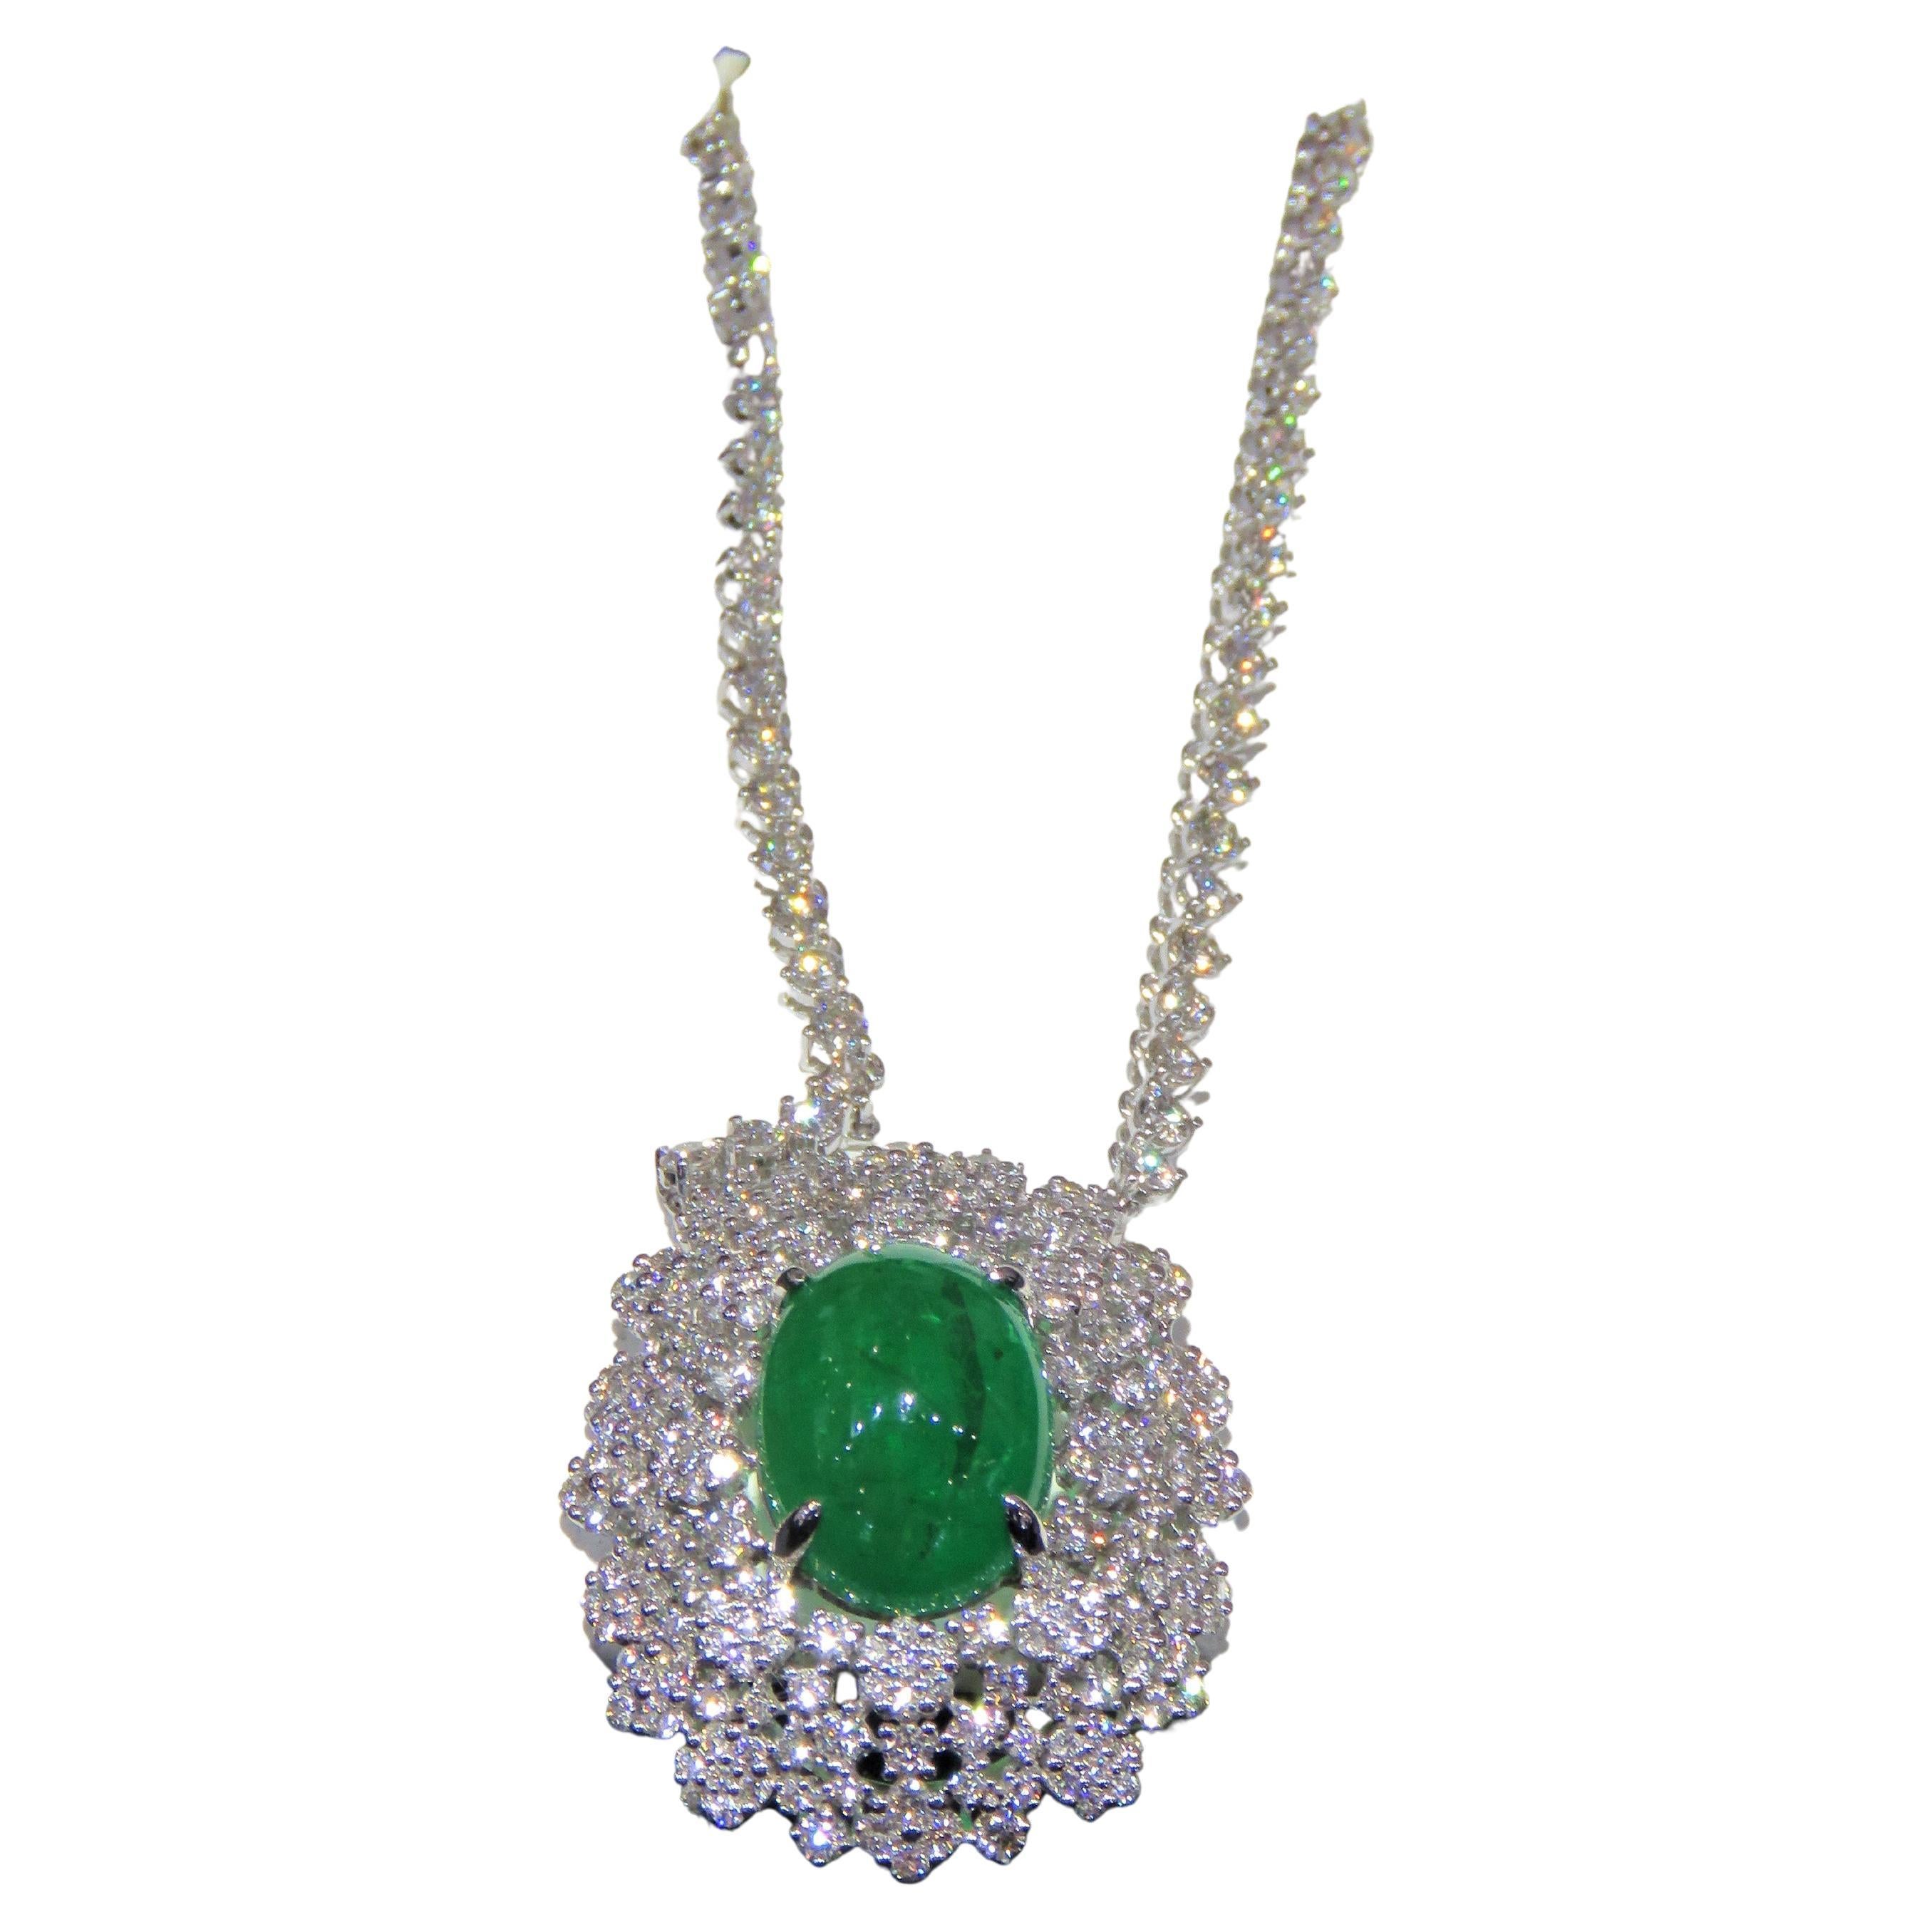 NWT $36, 839 Rare Gorgeous 18KT Gold Fancy Cabochon Emerald and Diamond Necklace For Sale